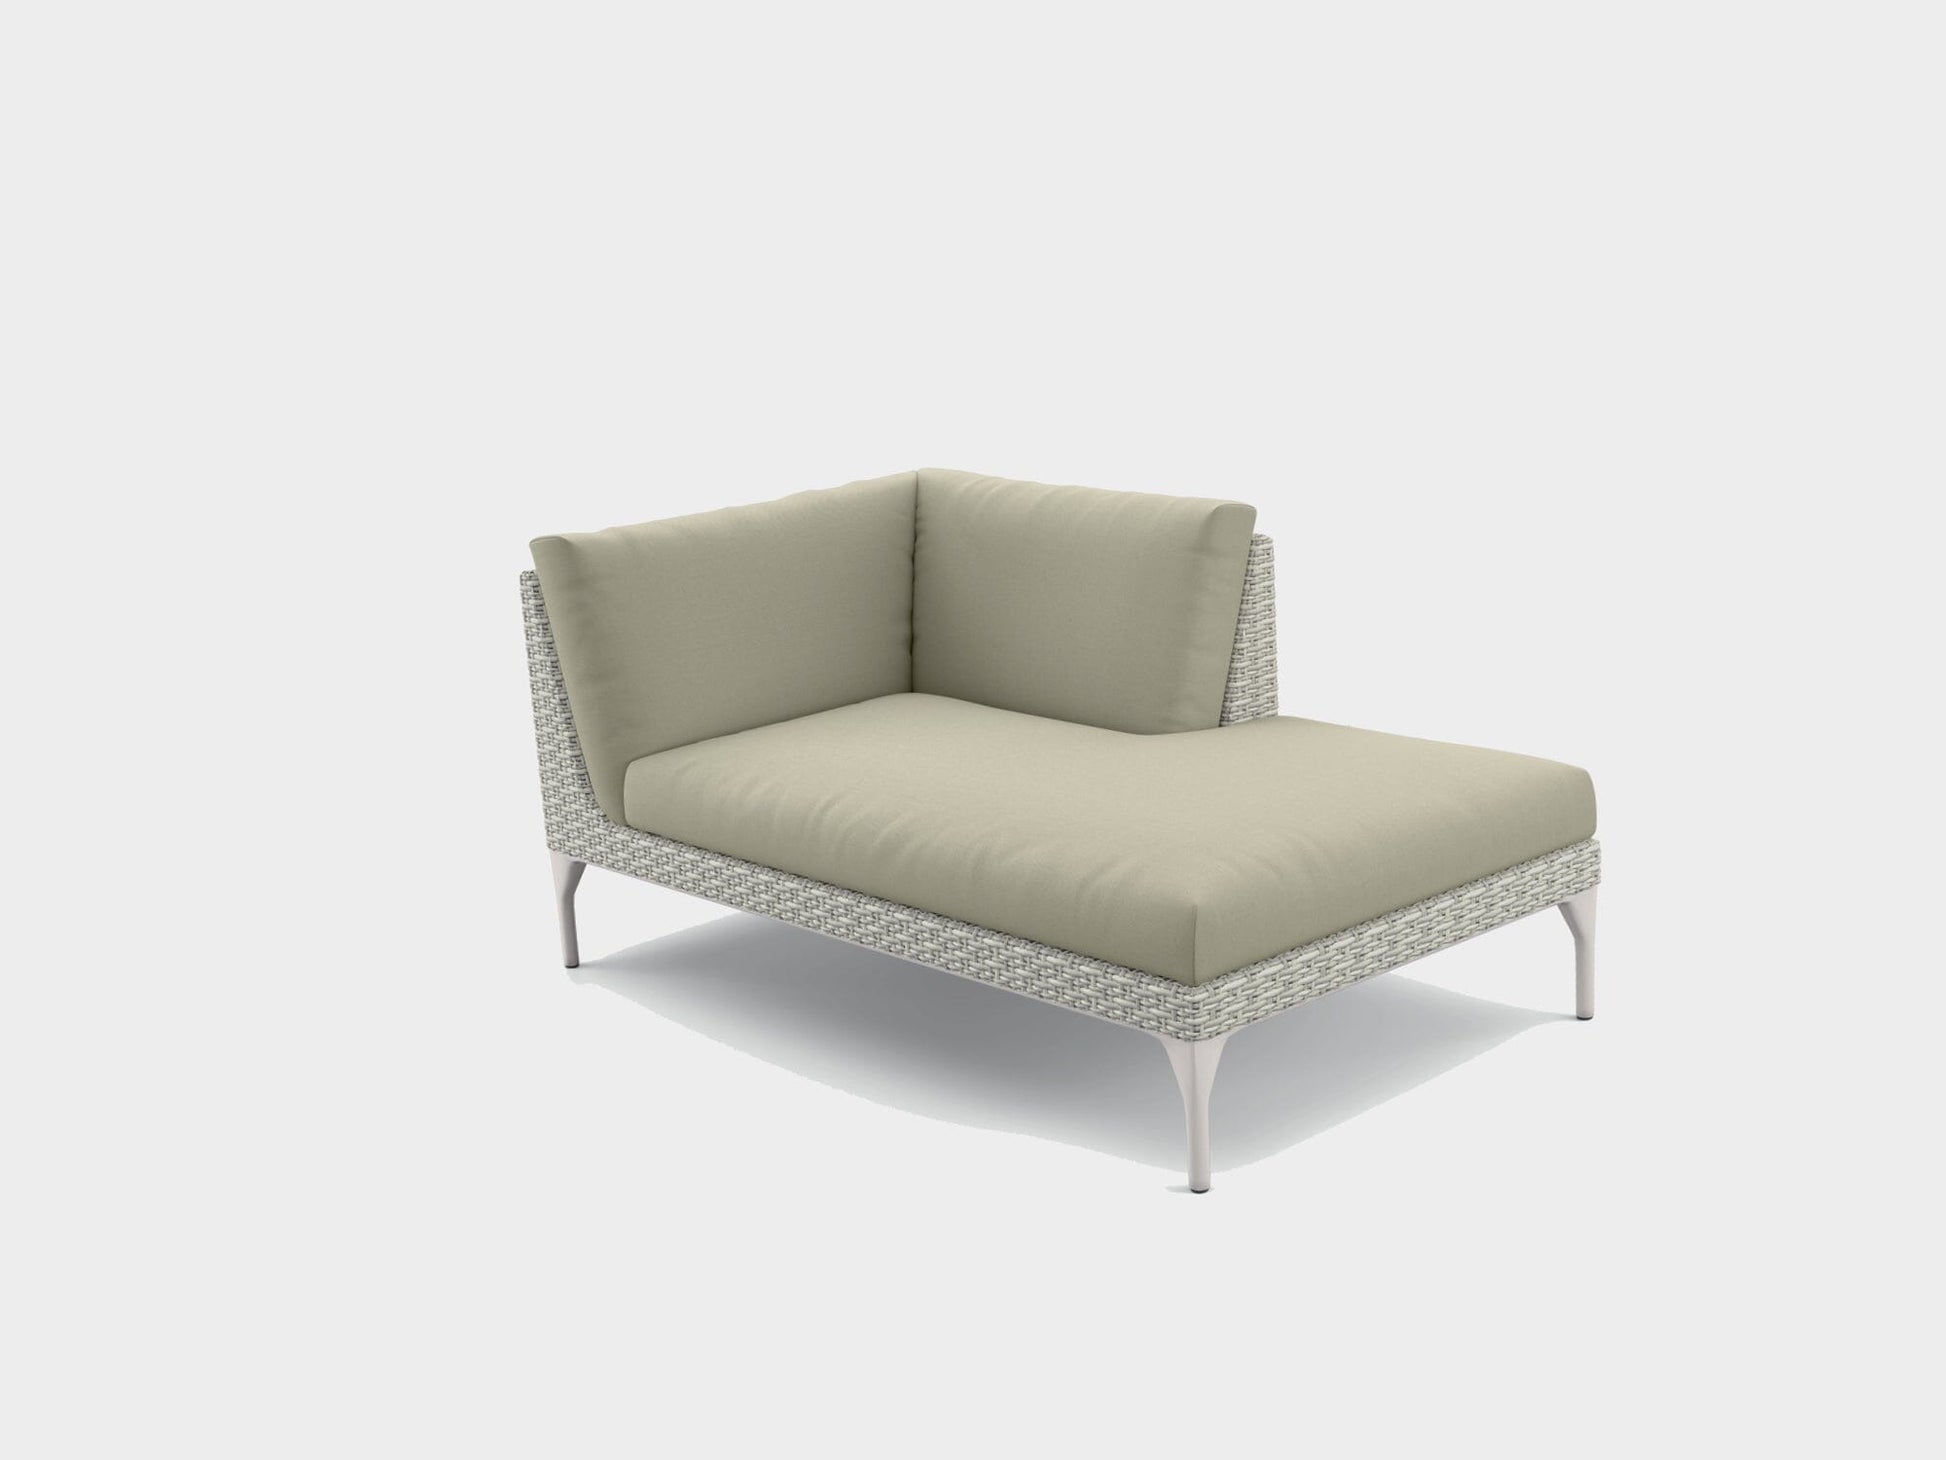 MU Daybed 30% Off Outdoor Furniture DEDON 